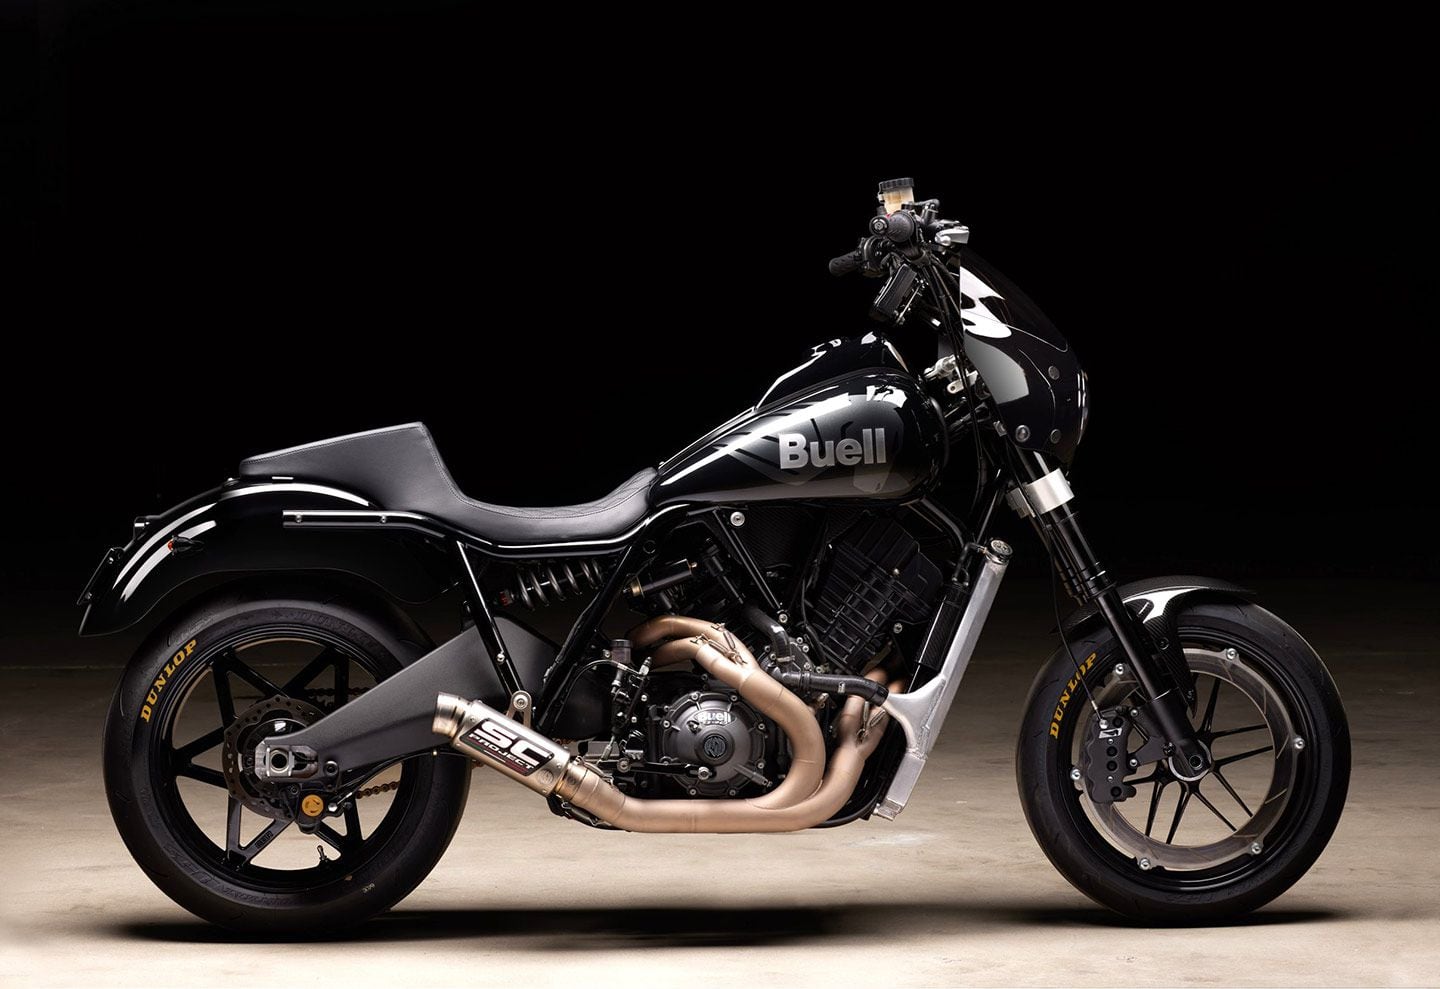 Buell’s high-performance 2025 Super Cruiser (preproduction model shown) has already attracted plenty of potential buyers.